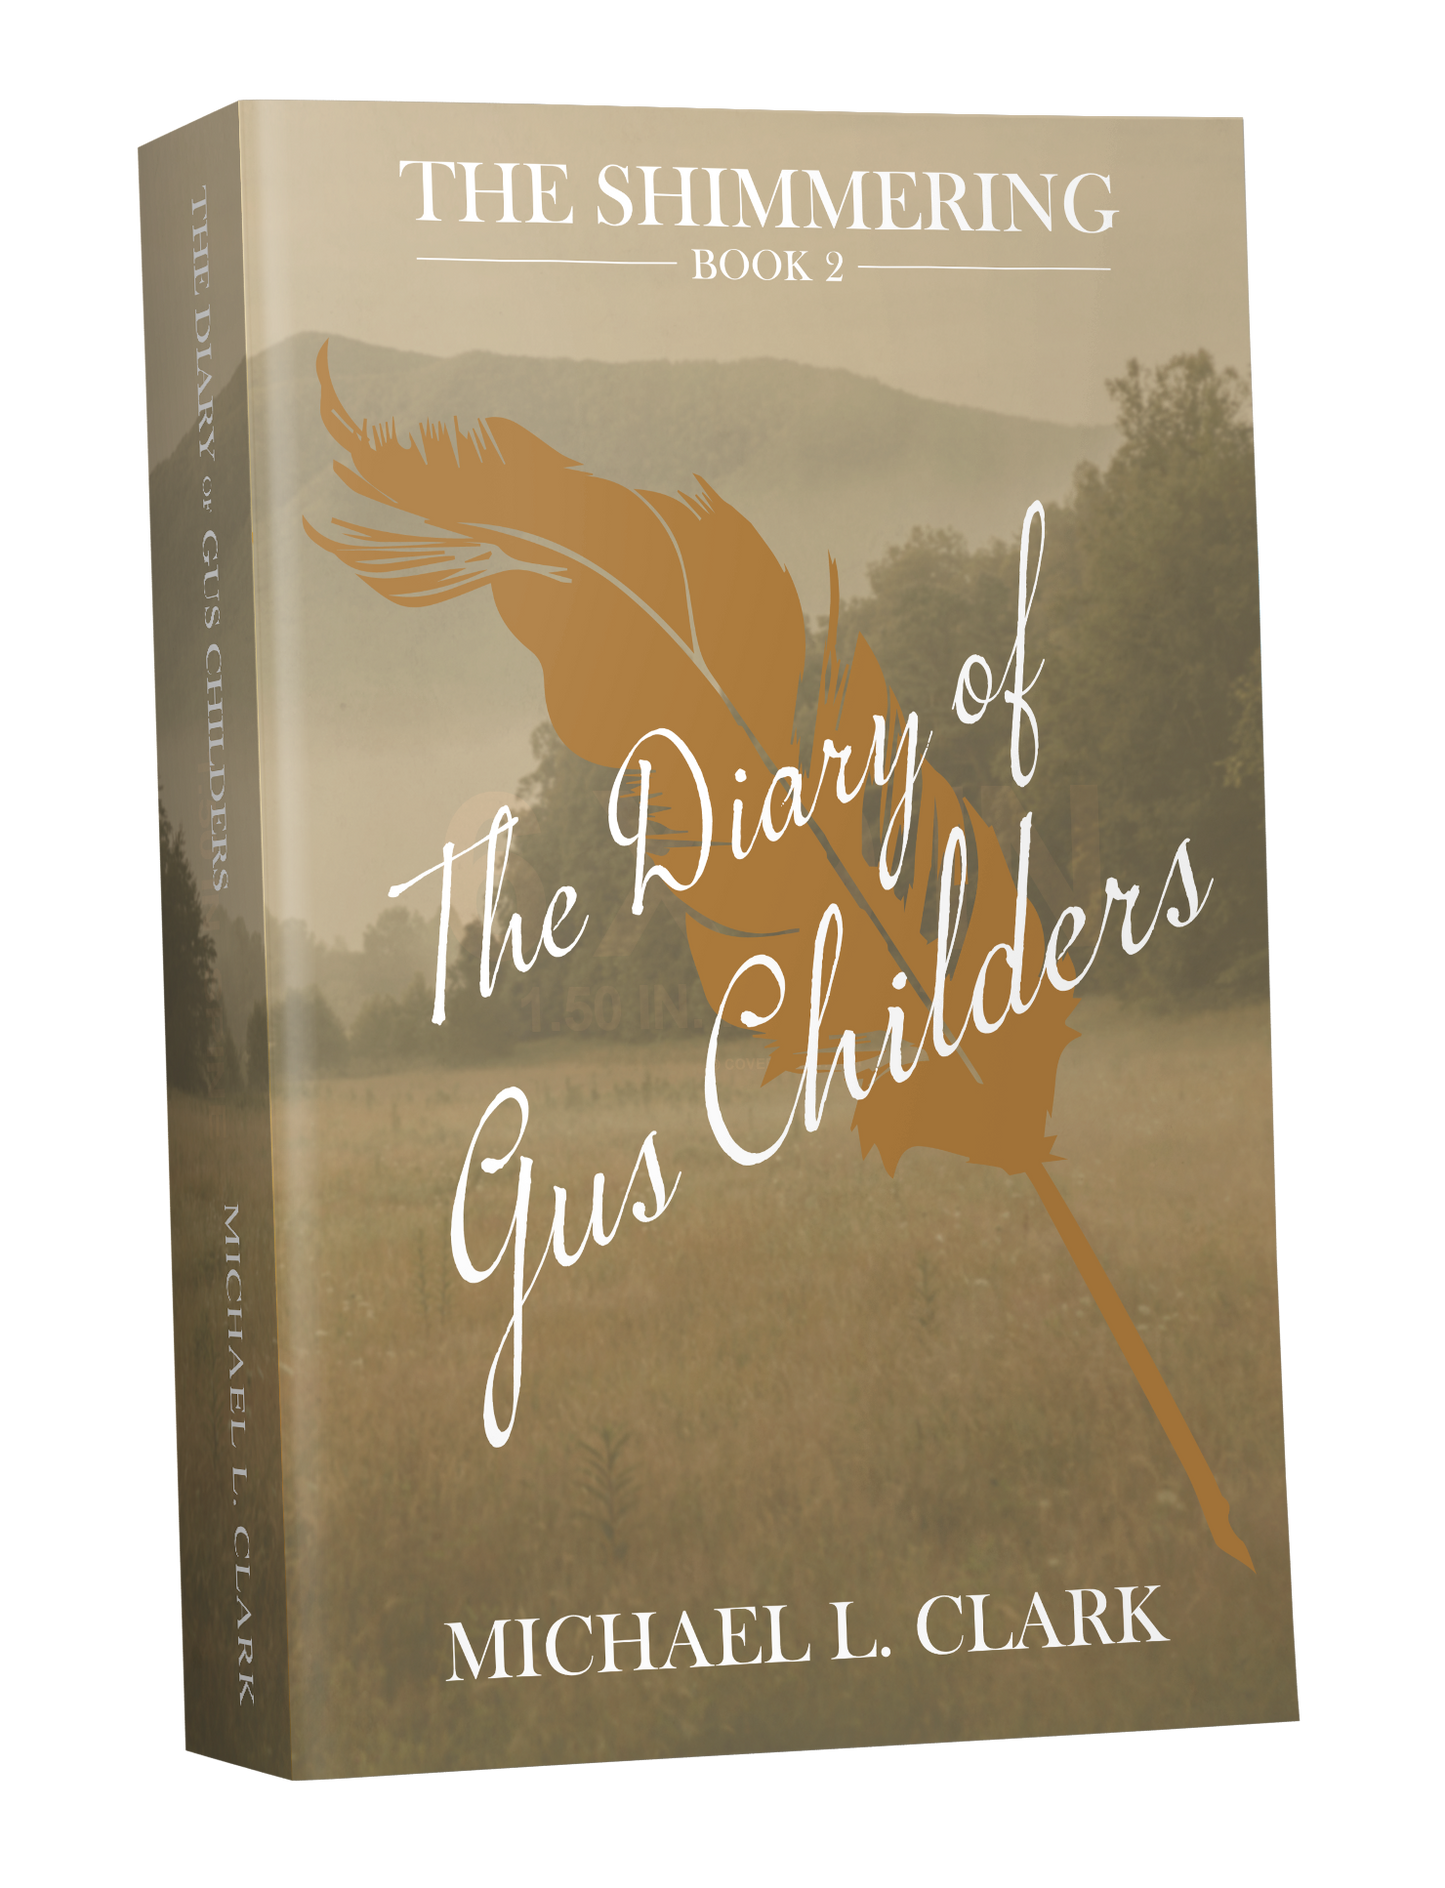 The Diary of Gus Childers - Book 2 of The Shimmering Ebook